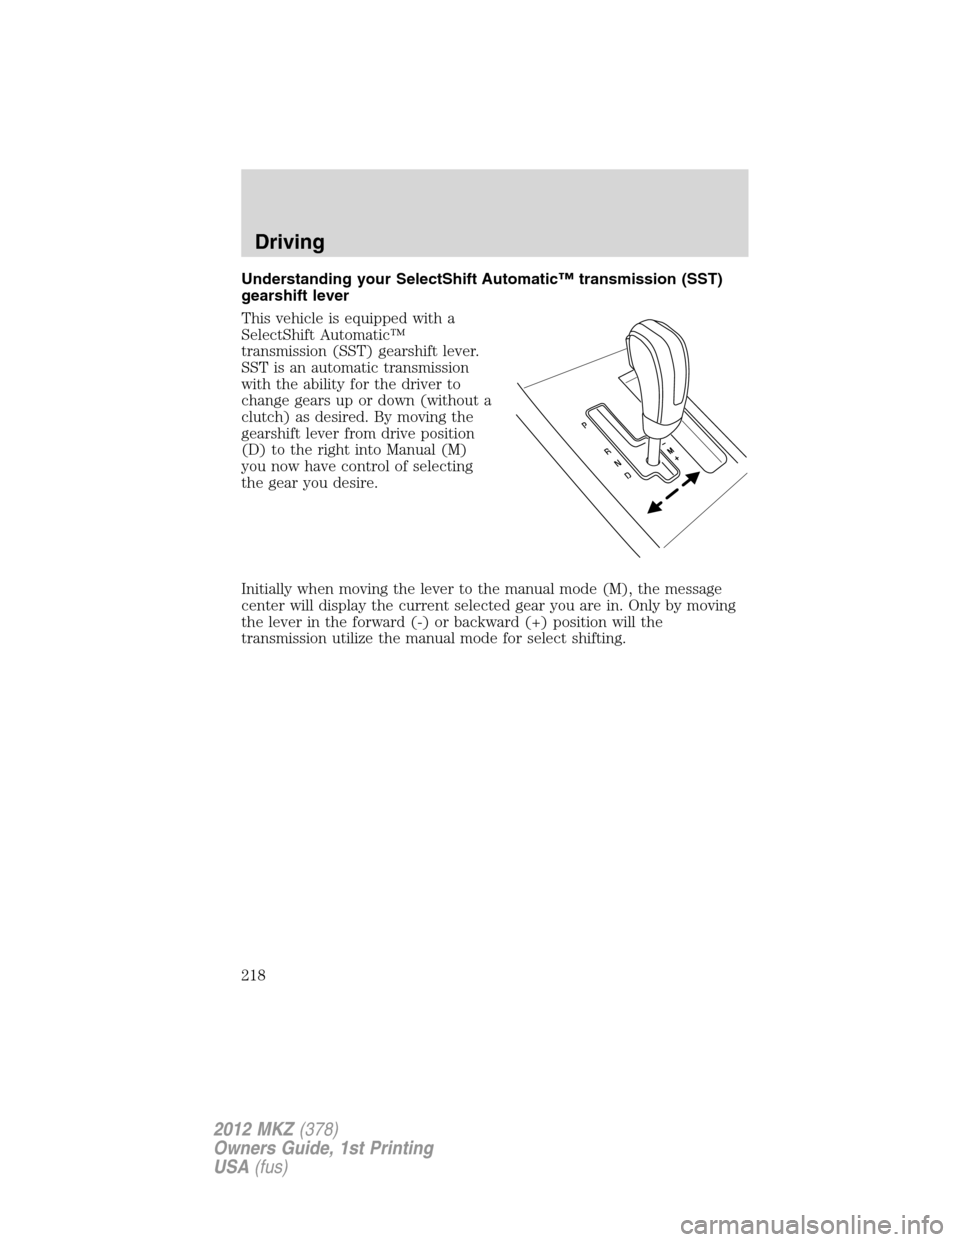 LINCOLN MKZ 2012  Owners Manual Understanding your SelectShift Automatic™ transmission (SST)
gearshift lever
This vehicle is equipped with a
SelectShift Automatic™
transmission (SST) gearshift lever.
SST is an automatic transmis